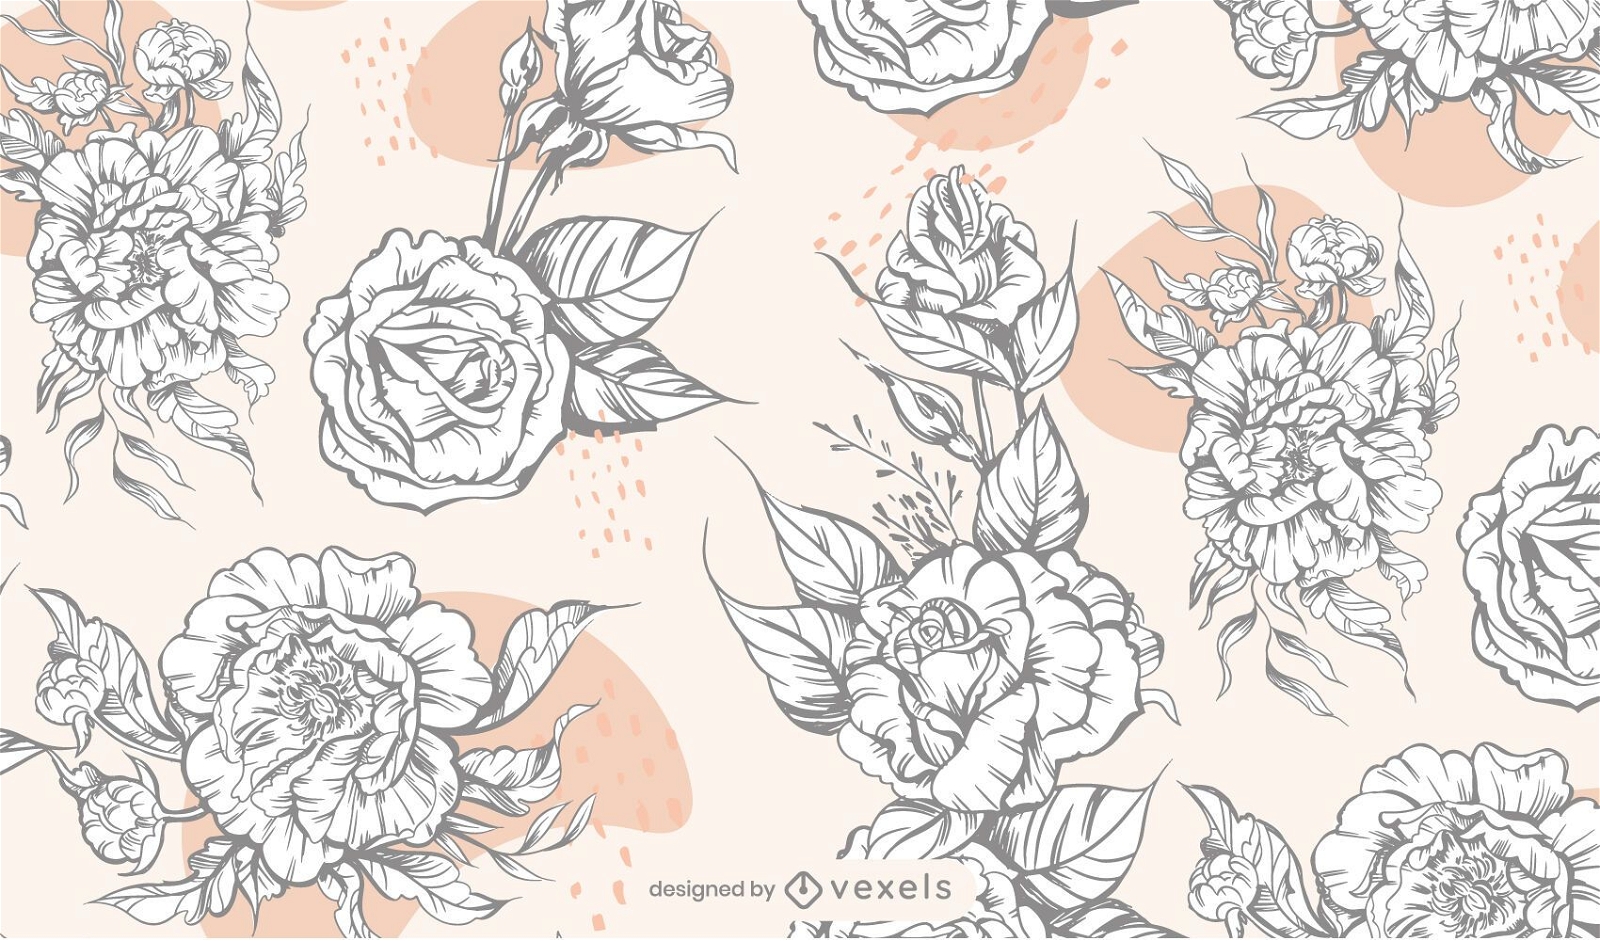 Black and white flowers pattern design